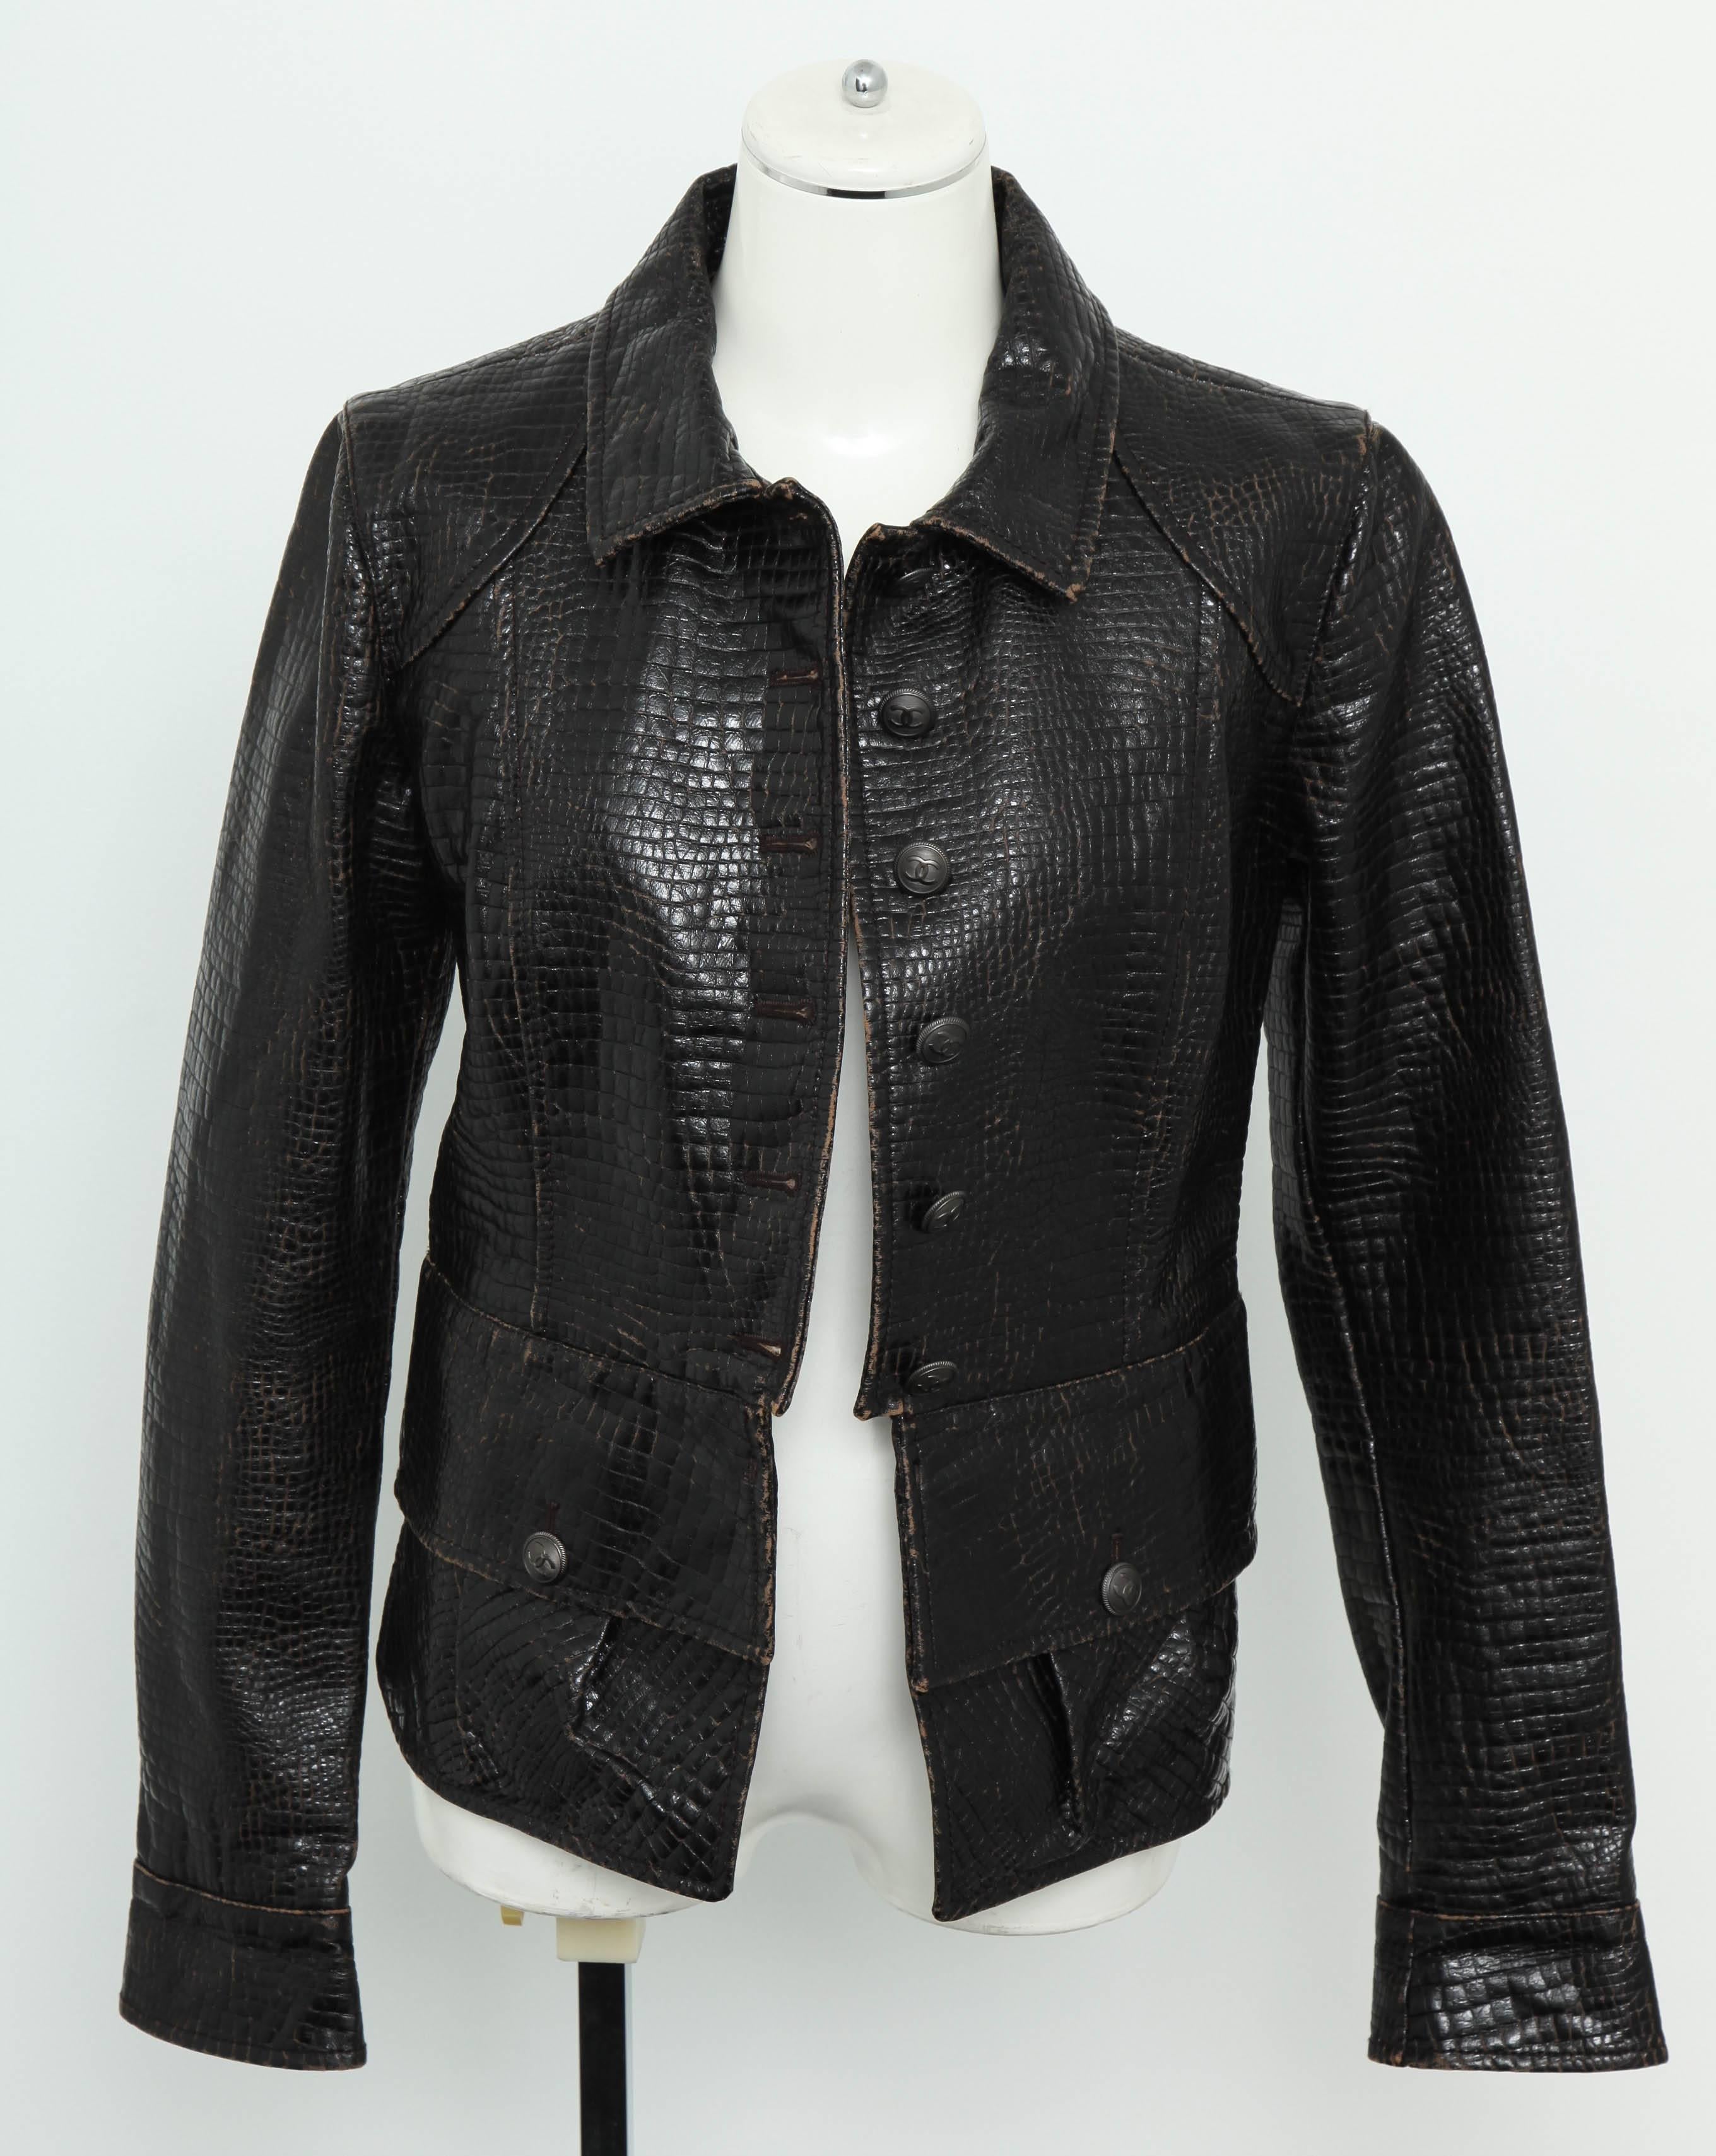 Very rare Chanel croc embossed cotton jacket in dark brown. As seen on runway. It looks like leather, 100% cotton. Size 42. 